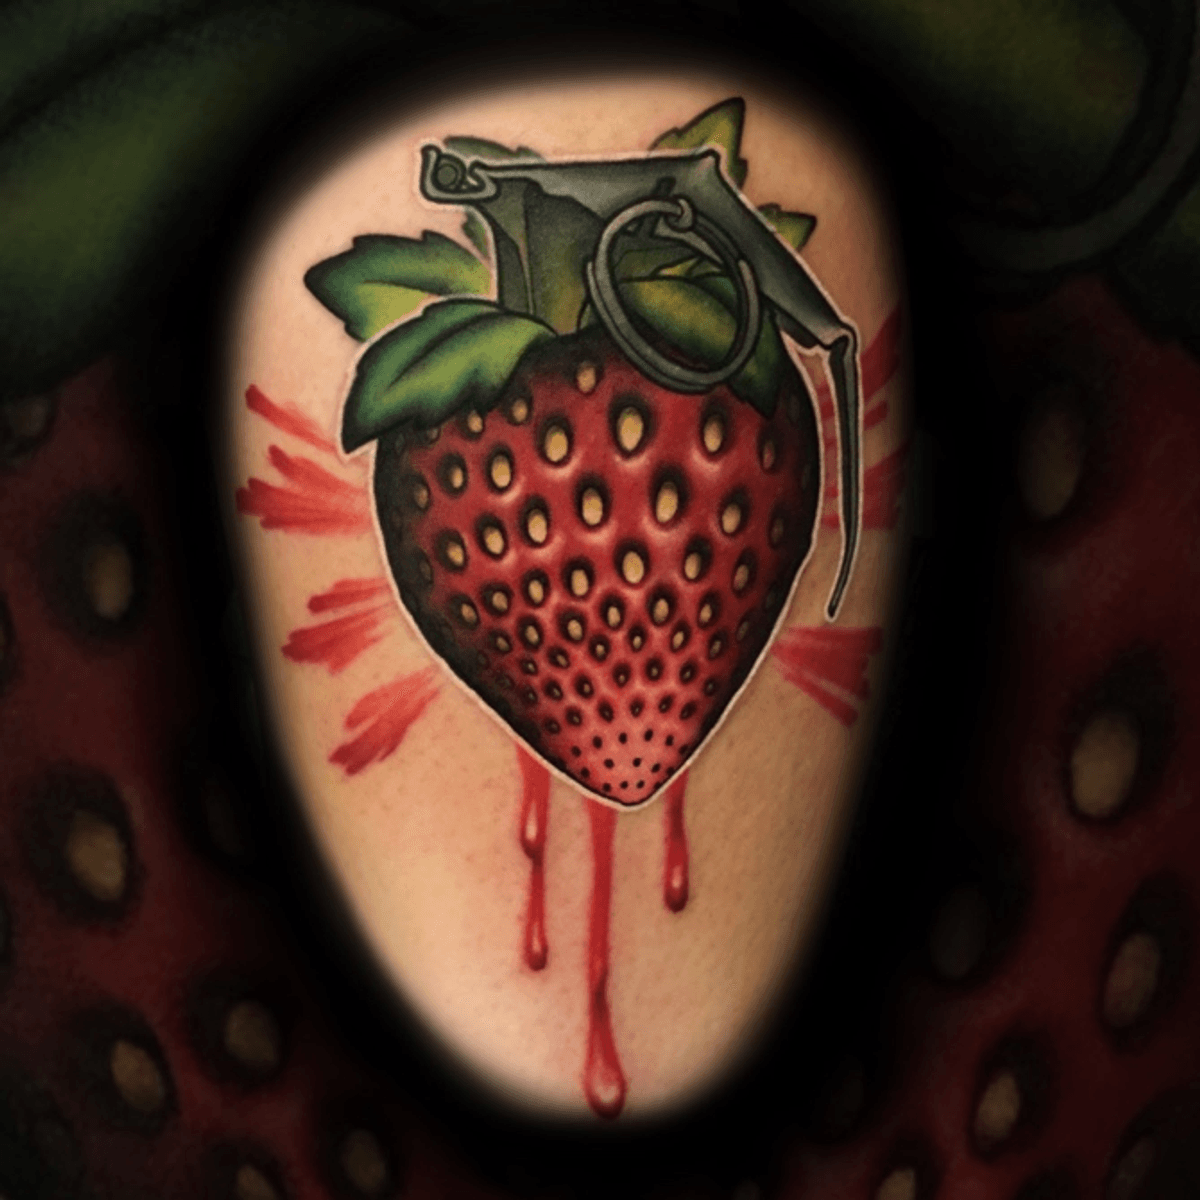 Tattoo Uploaded By Zachariah Fincher • Berry Bomb From About 2 Yrs Ago Monolithtattoo615 8407